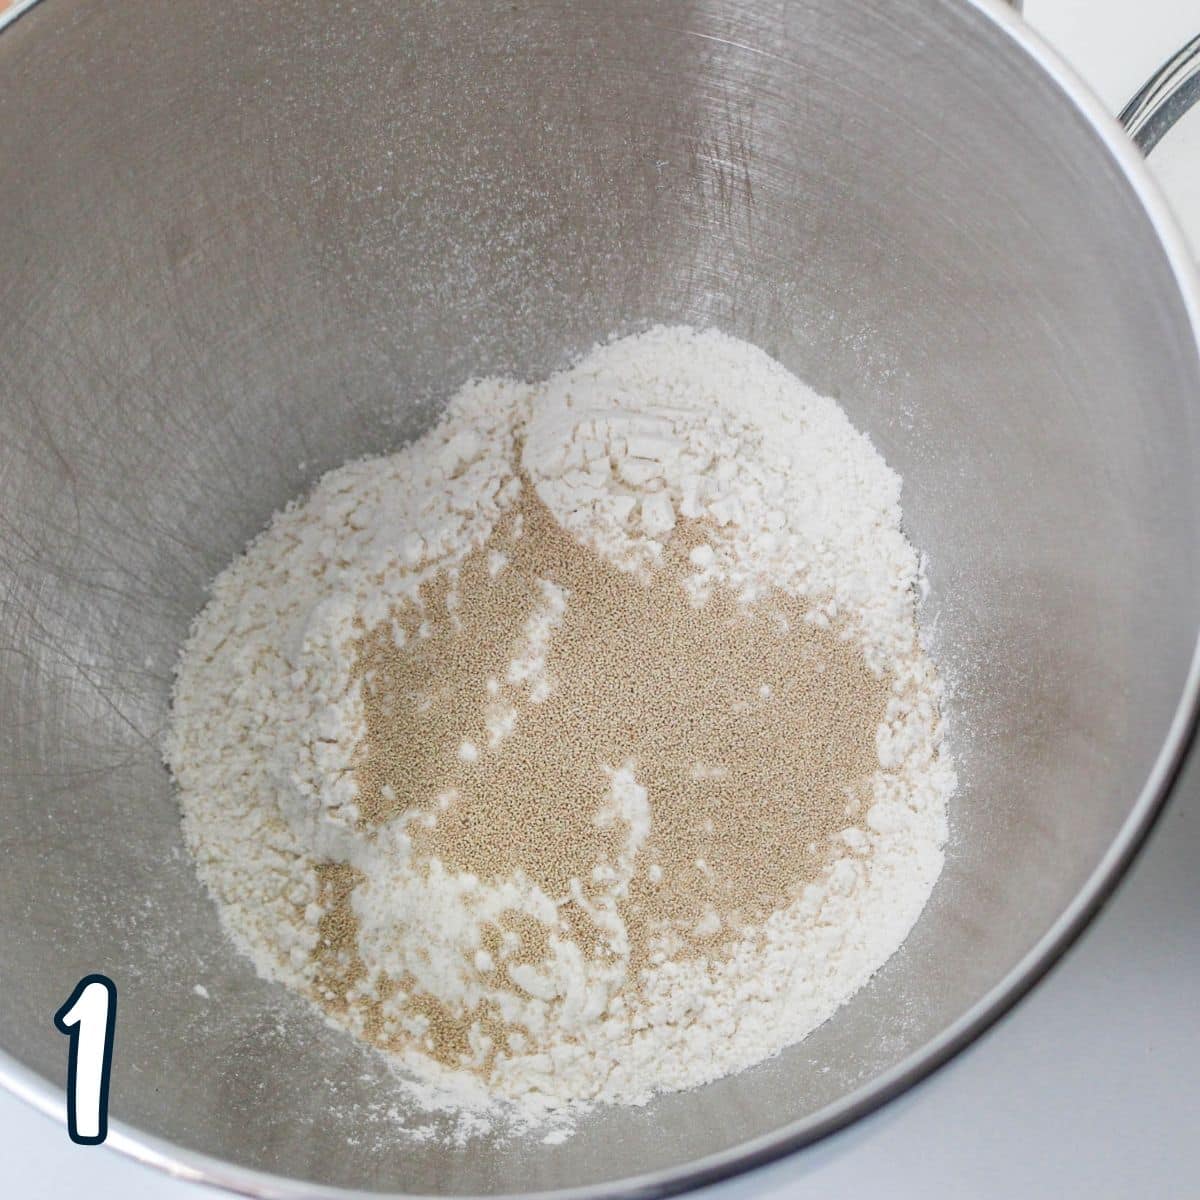 Flour and yeast in a metal mixing bowl.